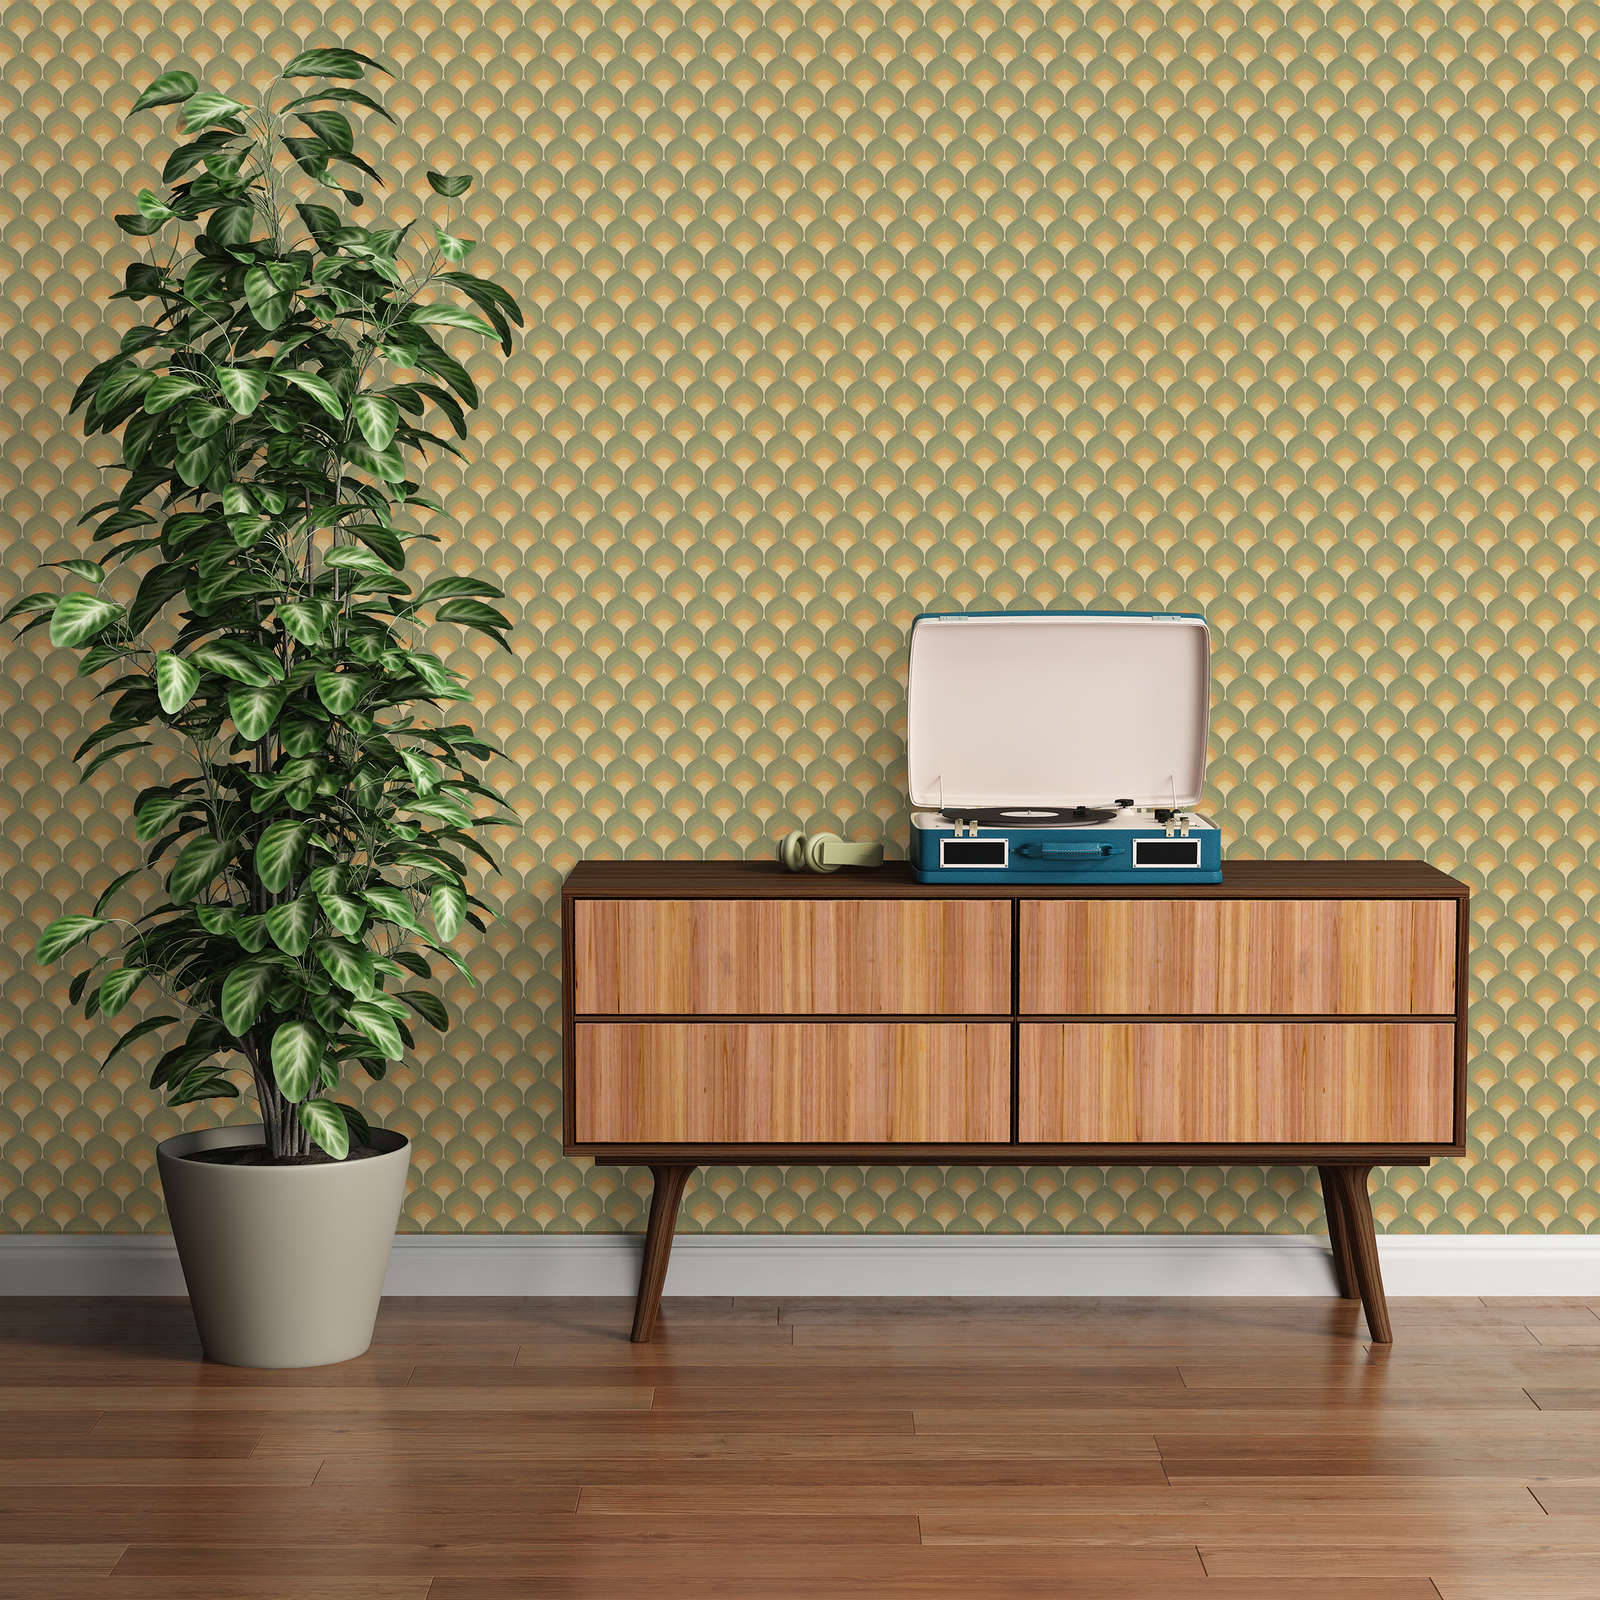             Retro style scaly pattern wallpaper - green, yellow, brown
        